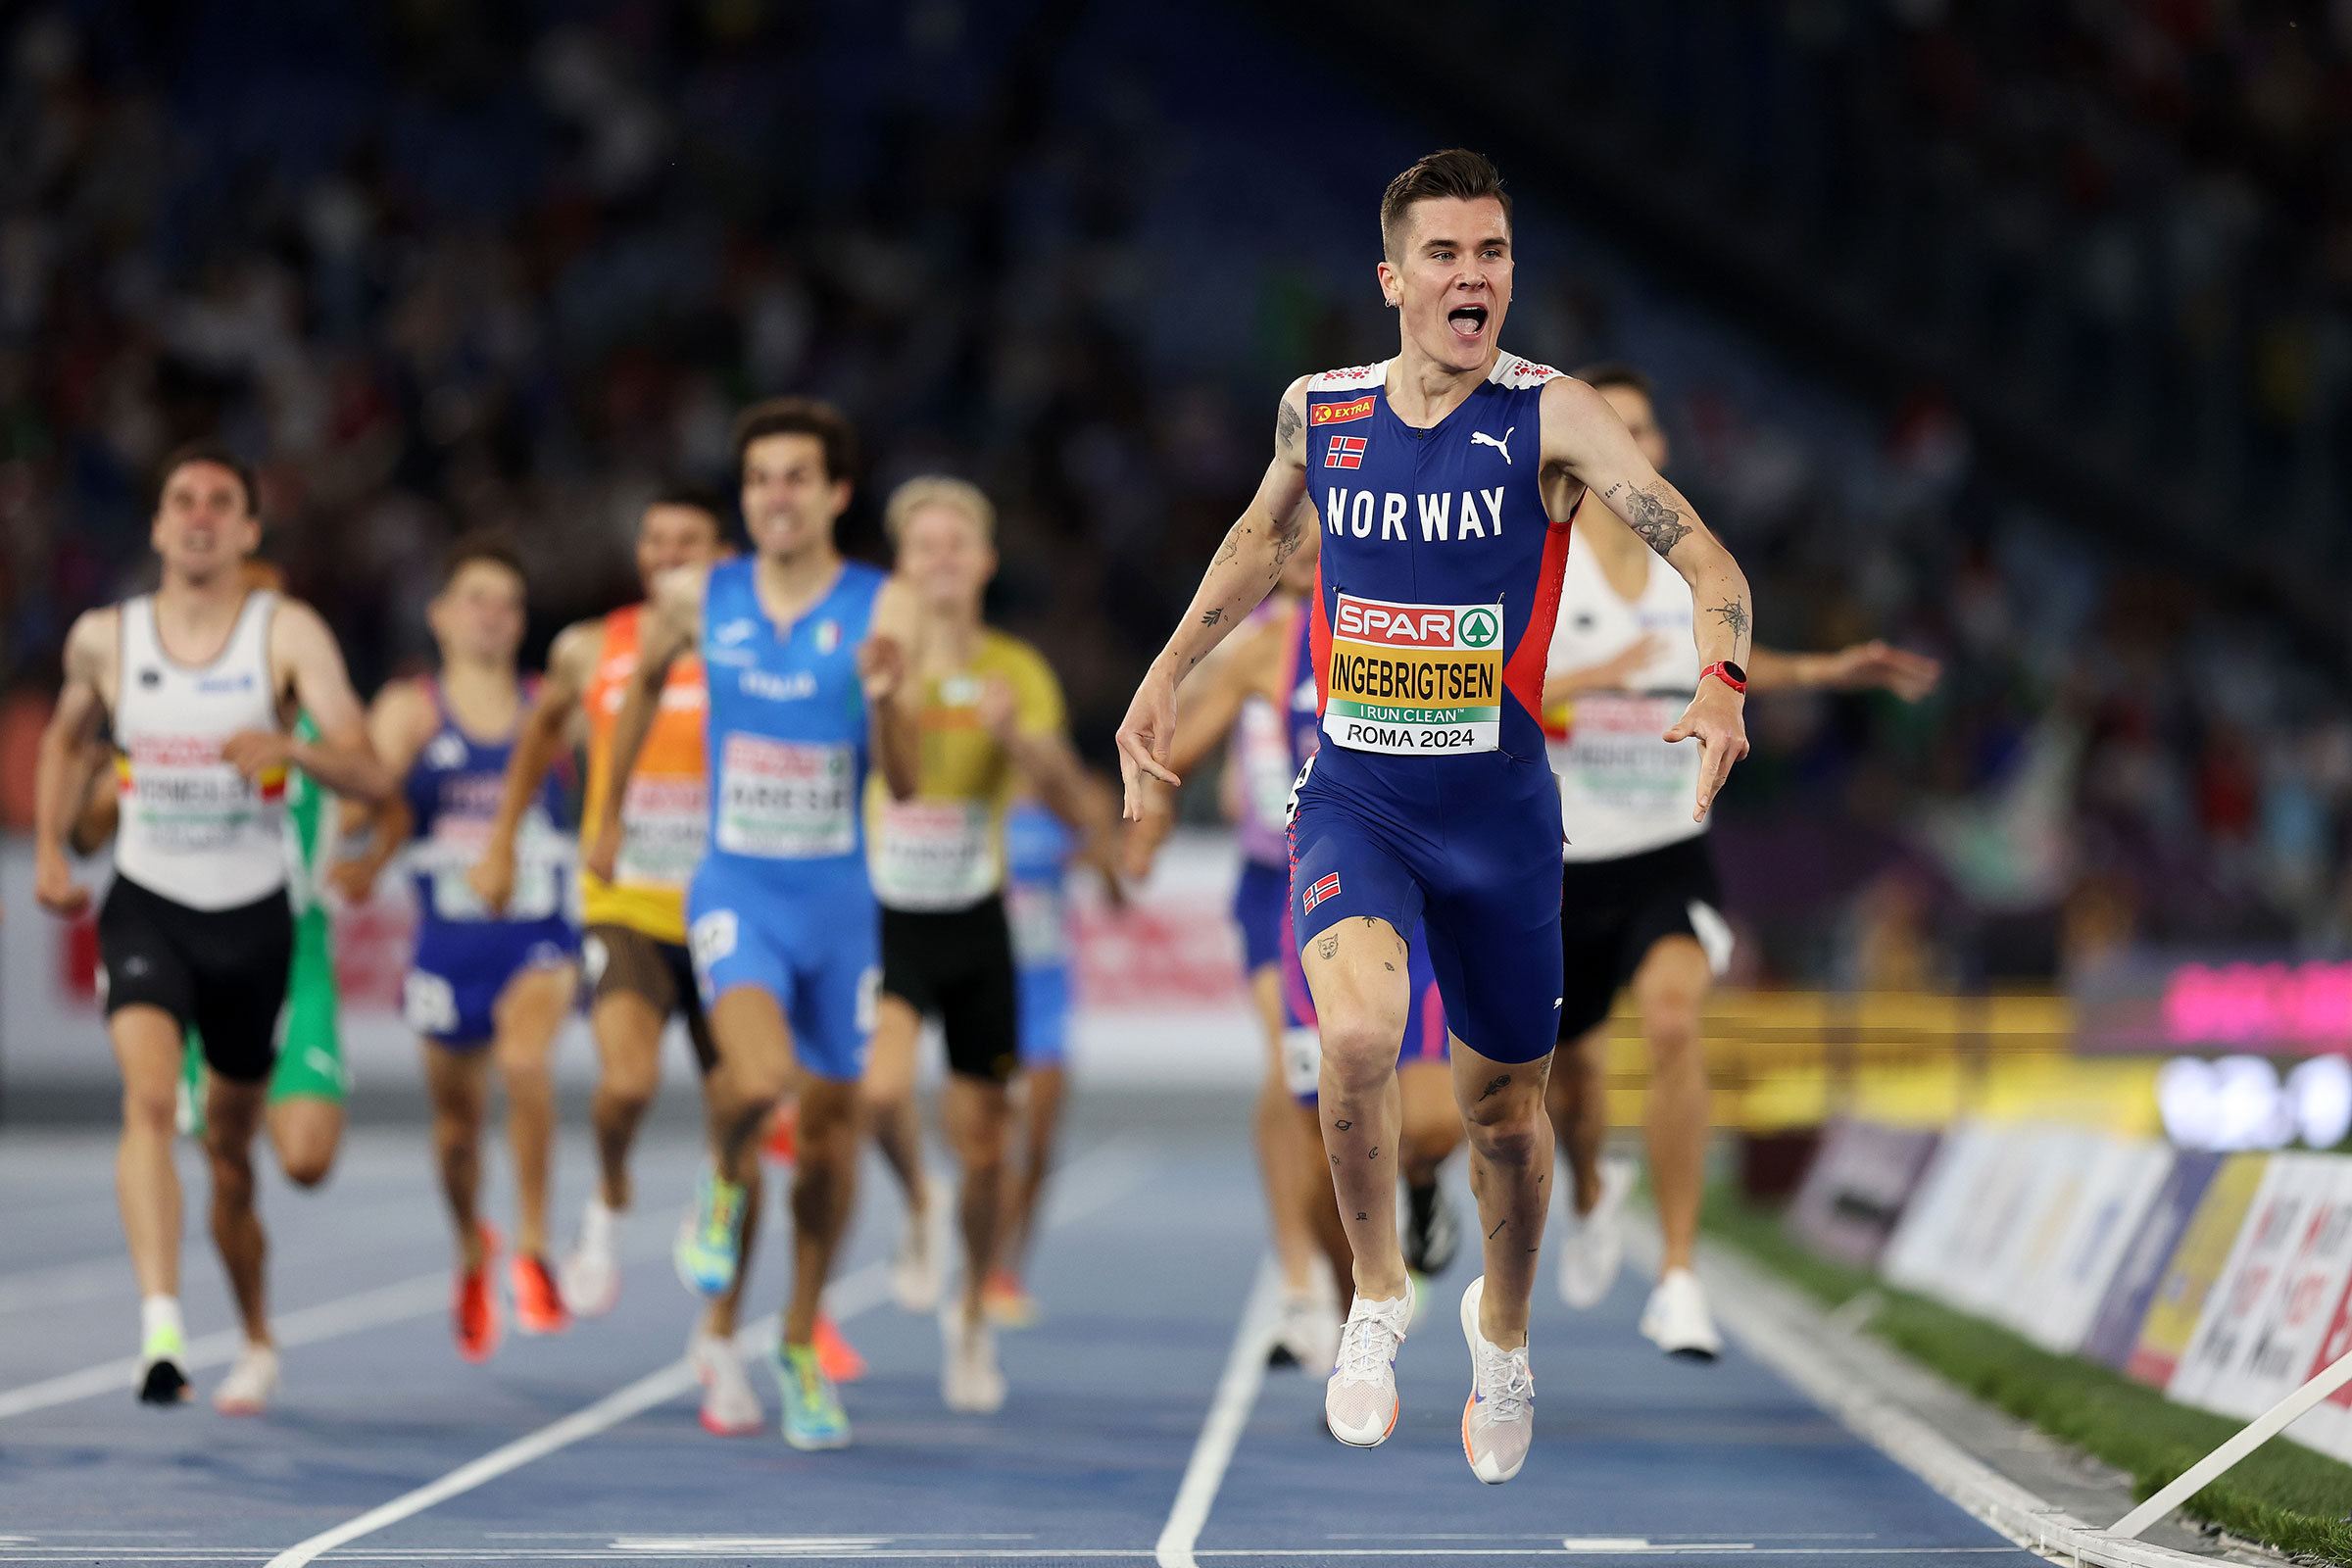 Jakob Ingebrigtsen of Team Norway crosses the finish line to win the Gold medal in the Men’s 1500m Final on day six of the 26th European Athletics Championships in Rome 2024 at Stadio Olimpico on June 12, 2024.